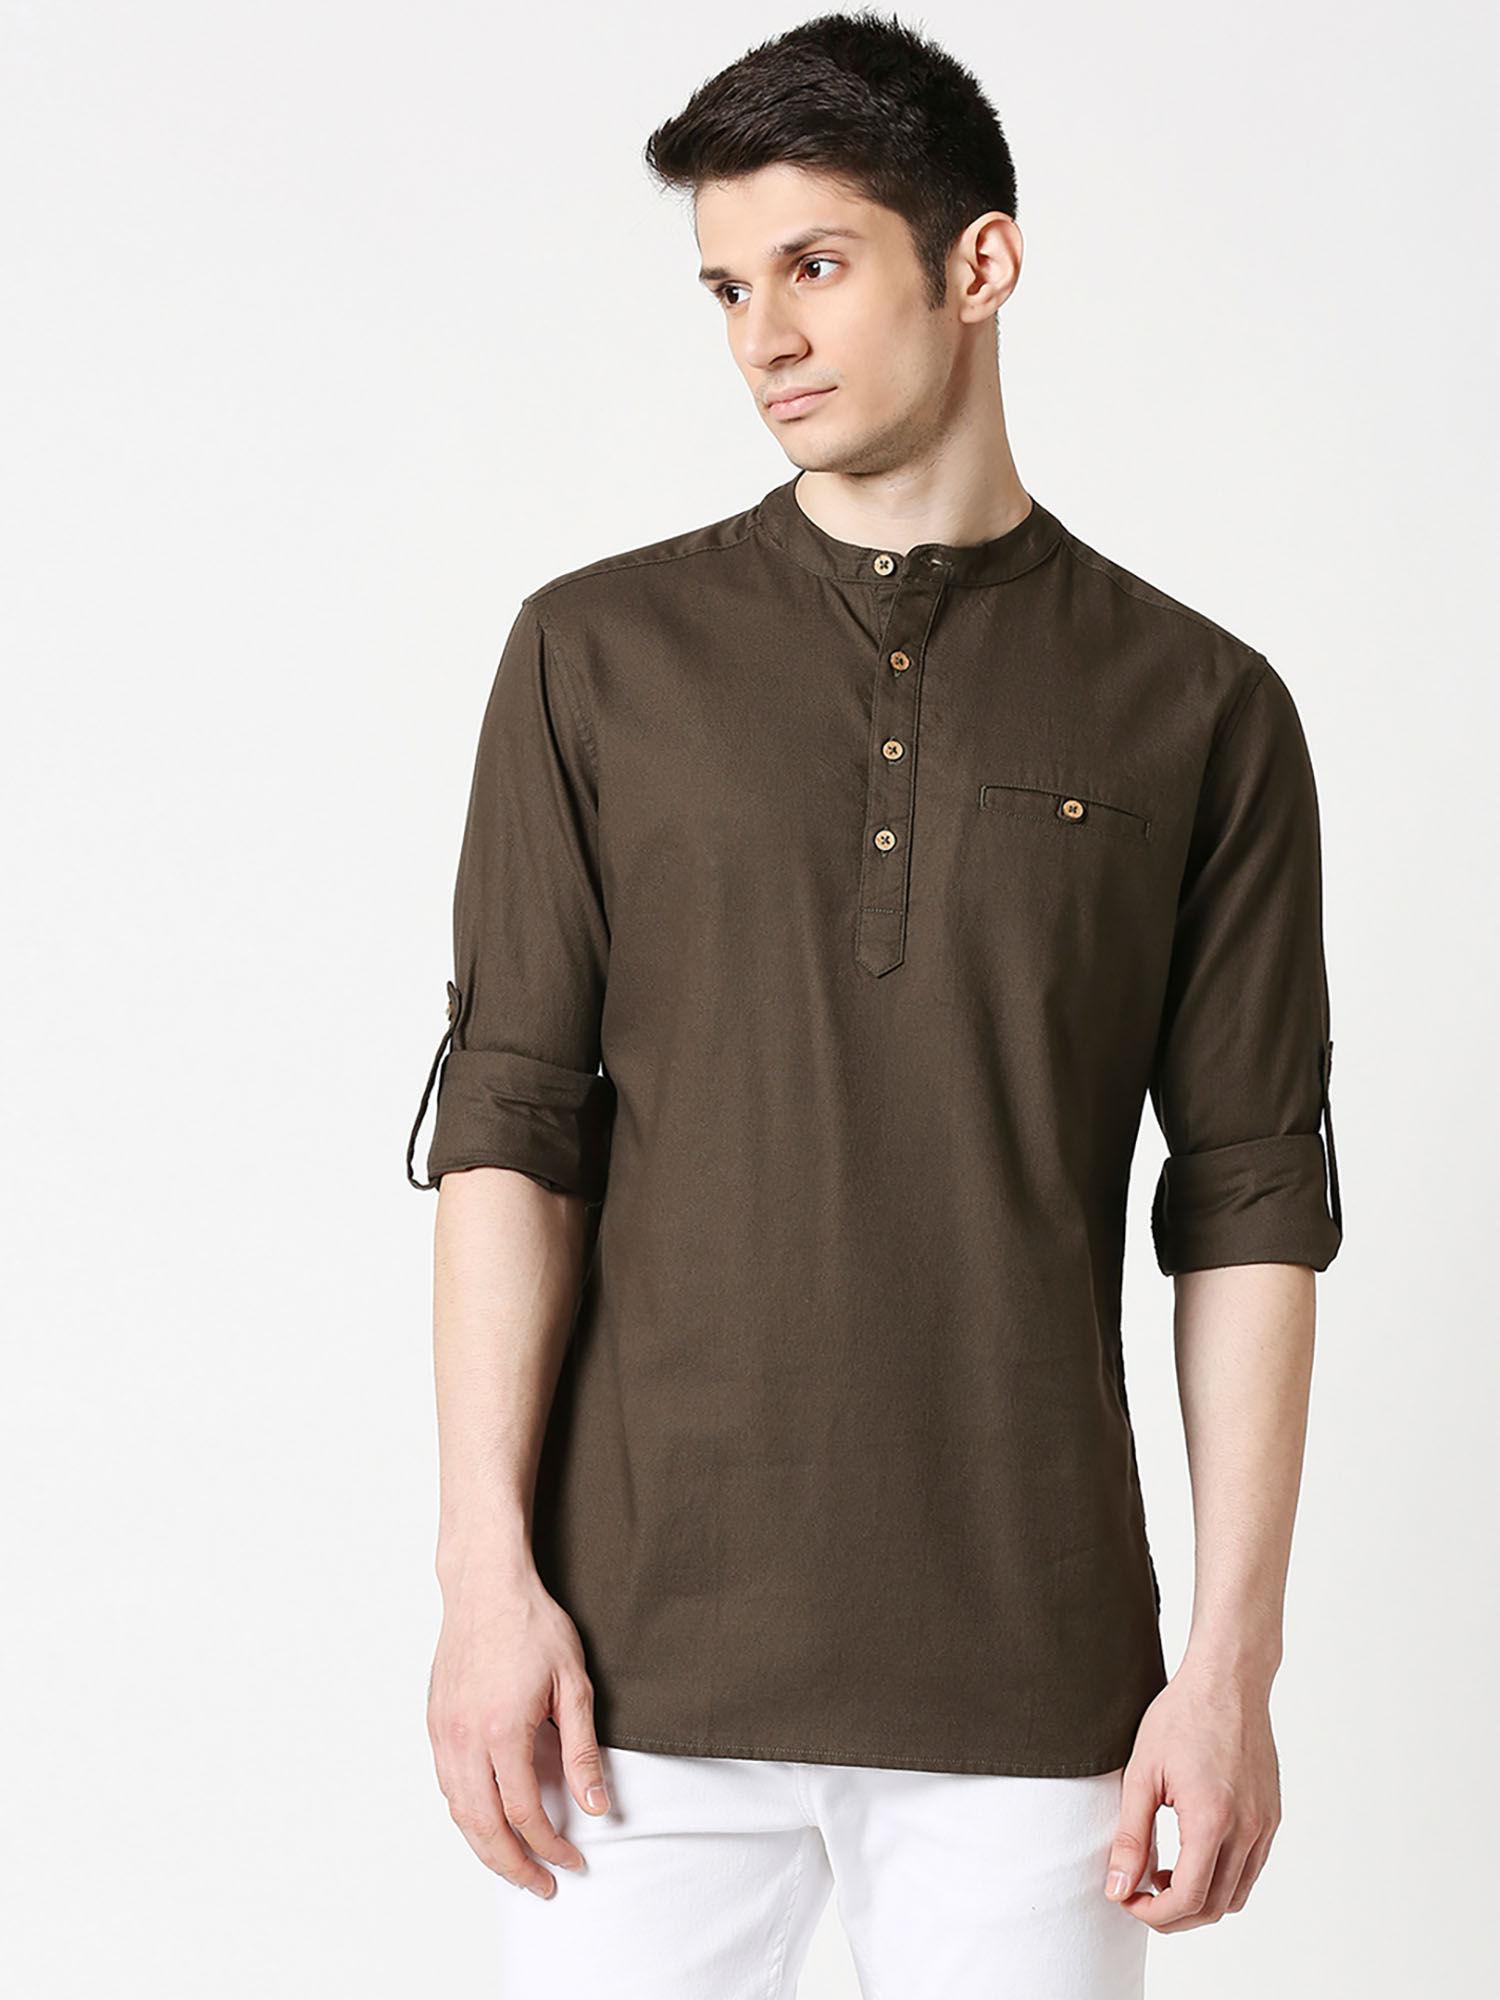 men's relaxed fit olive solid short kurta